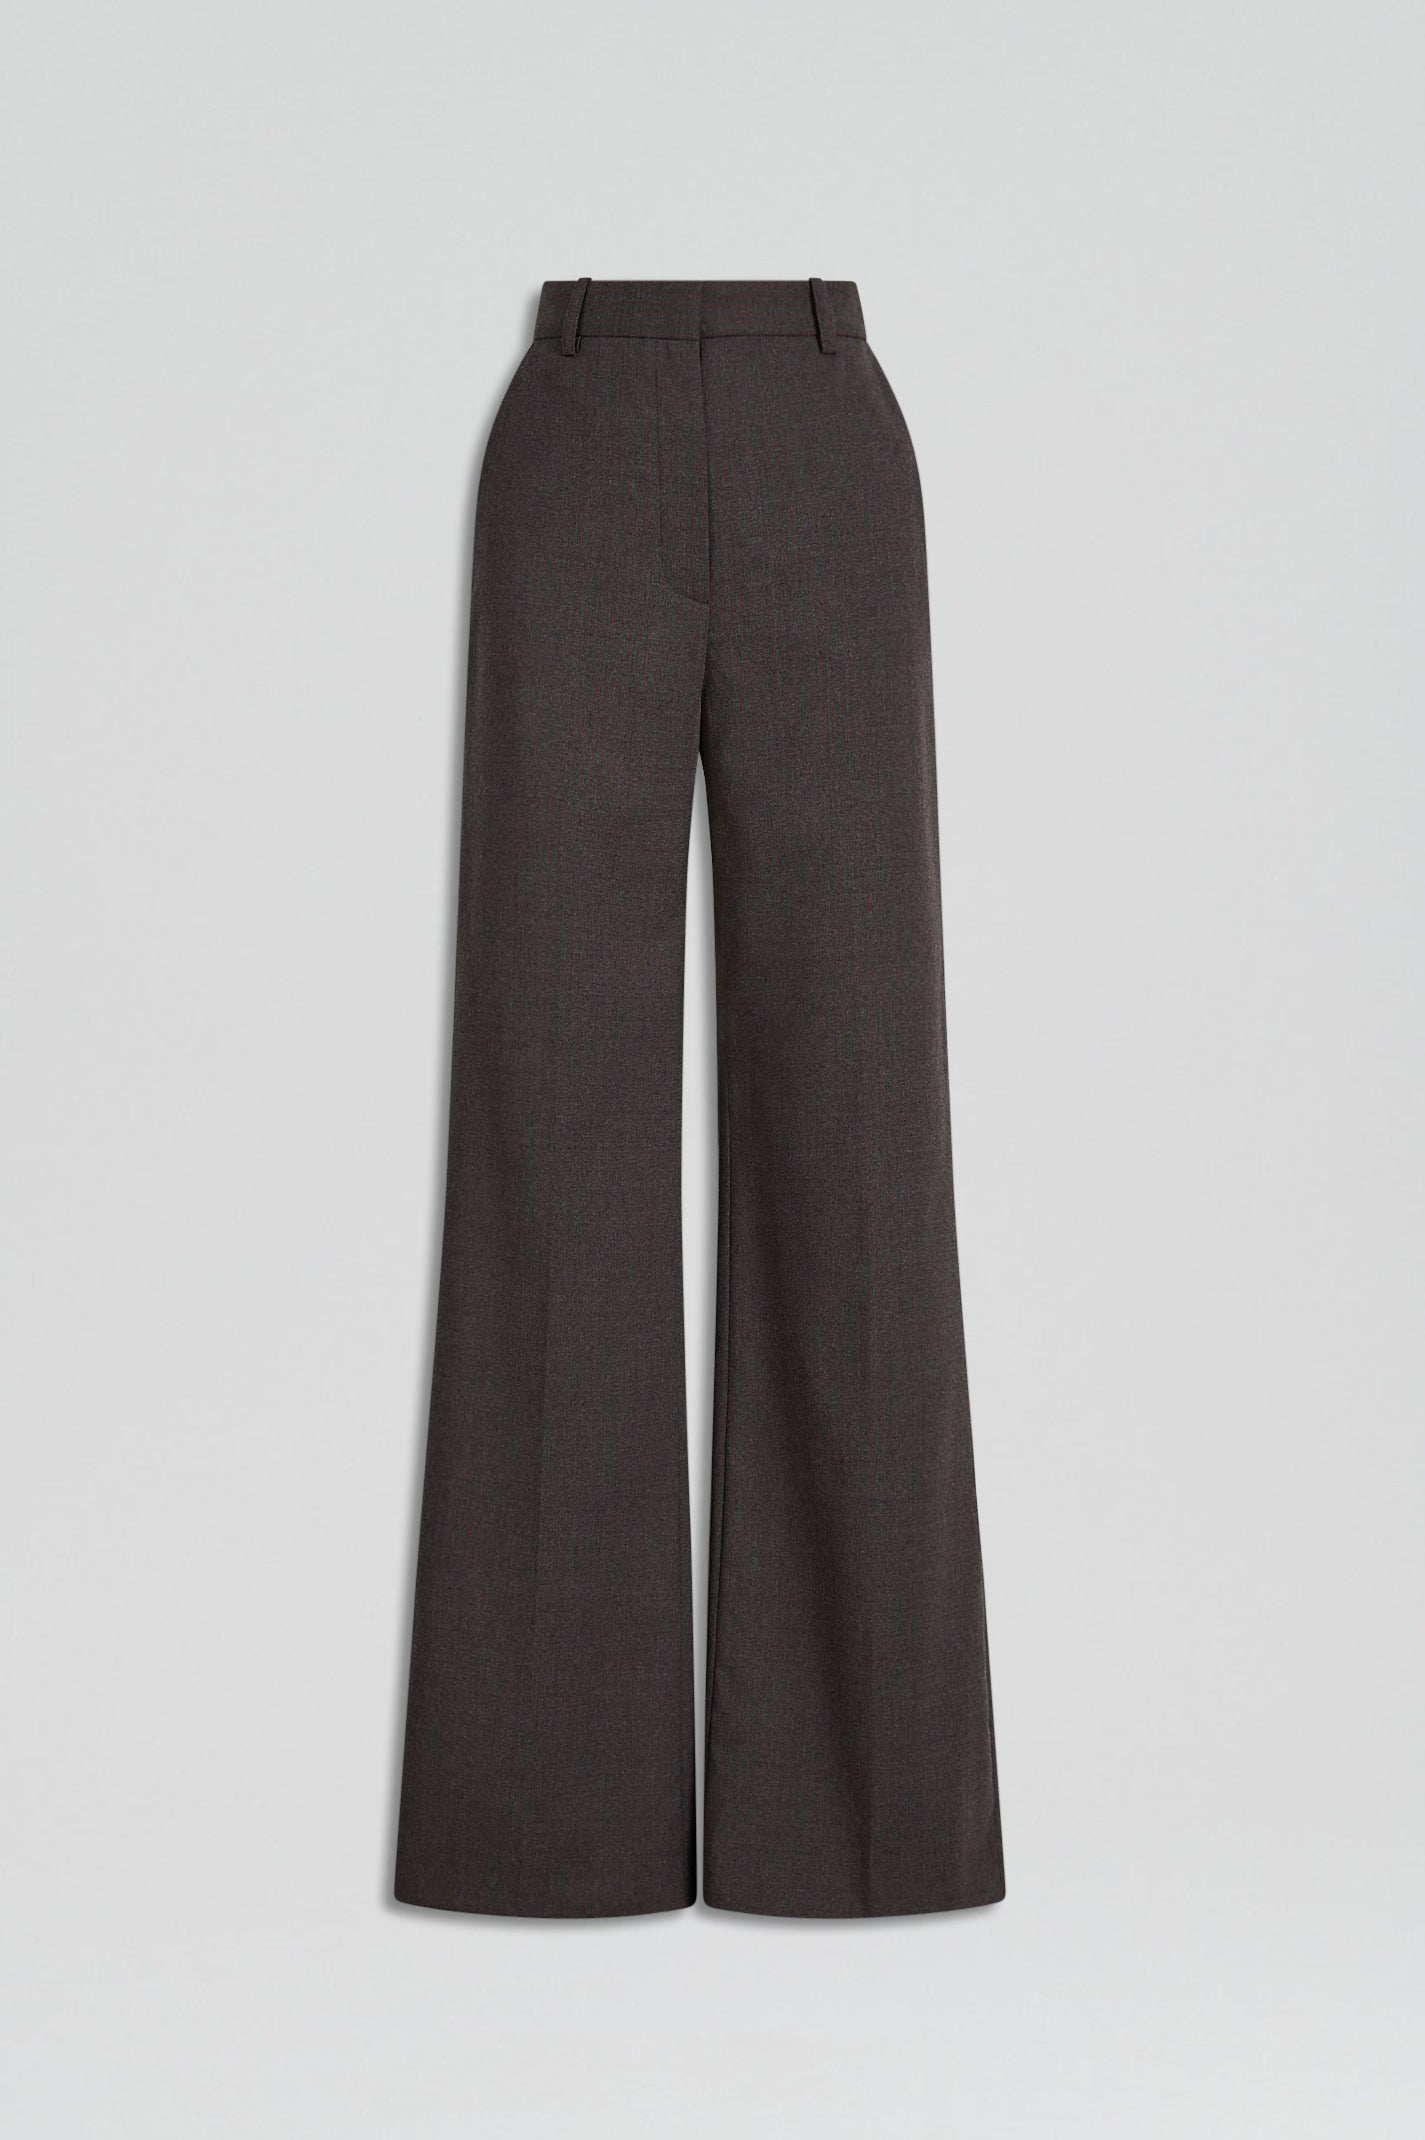 Canon Pink Wool Pant